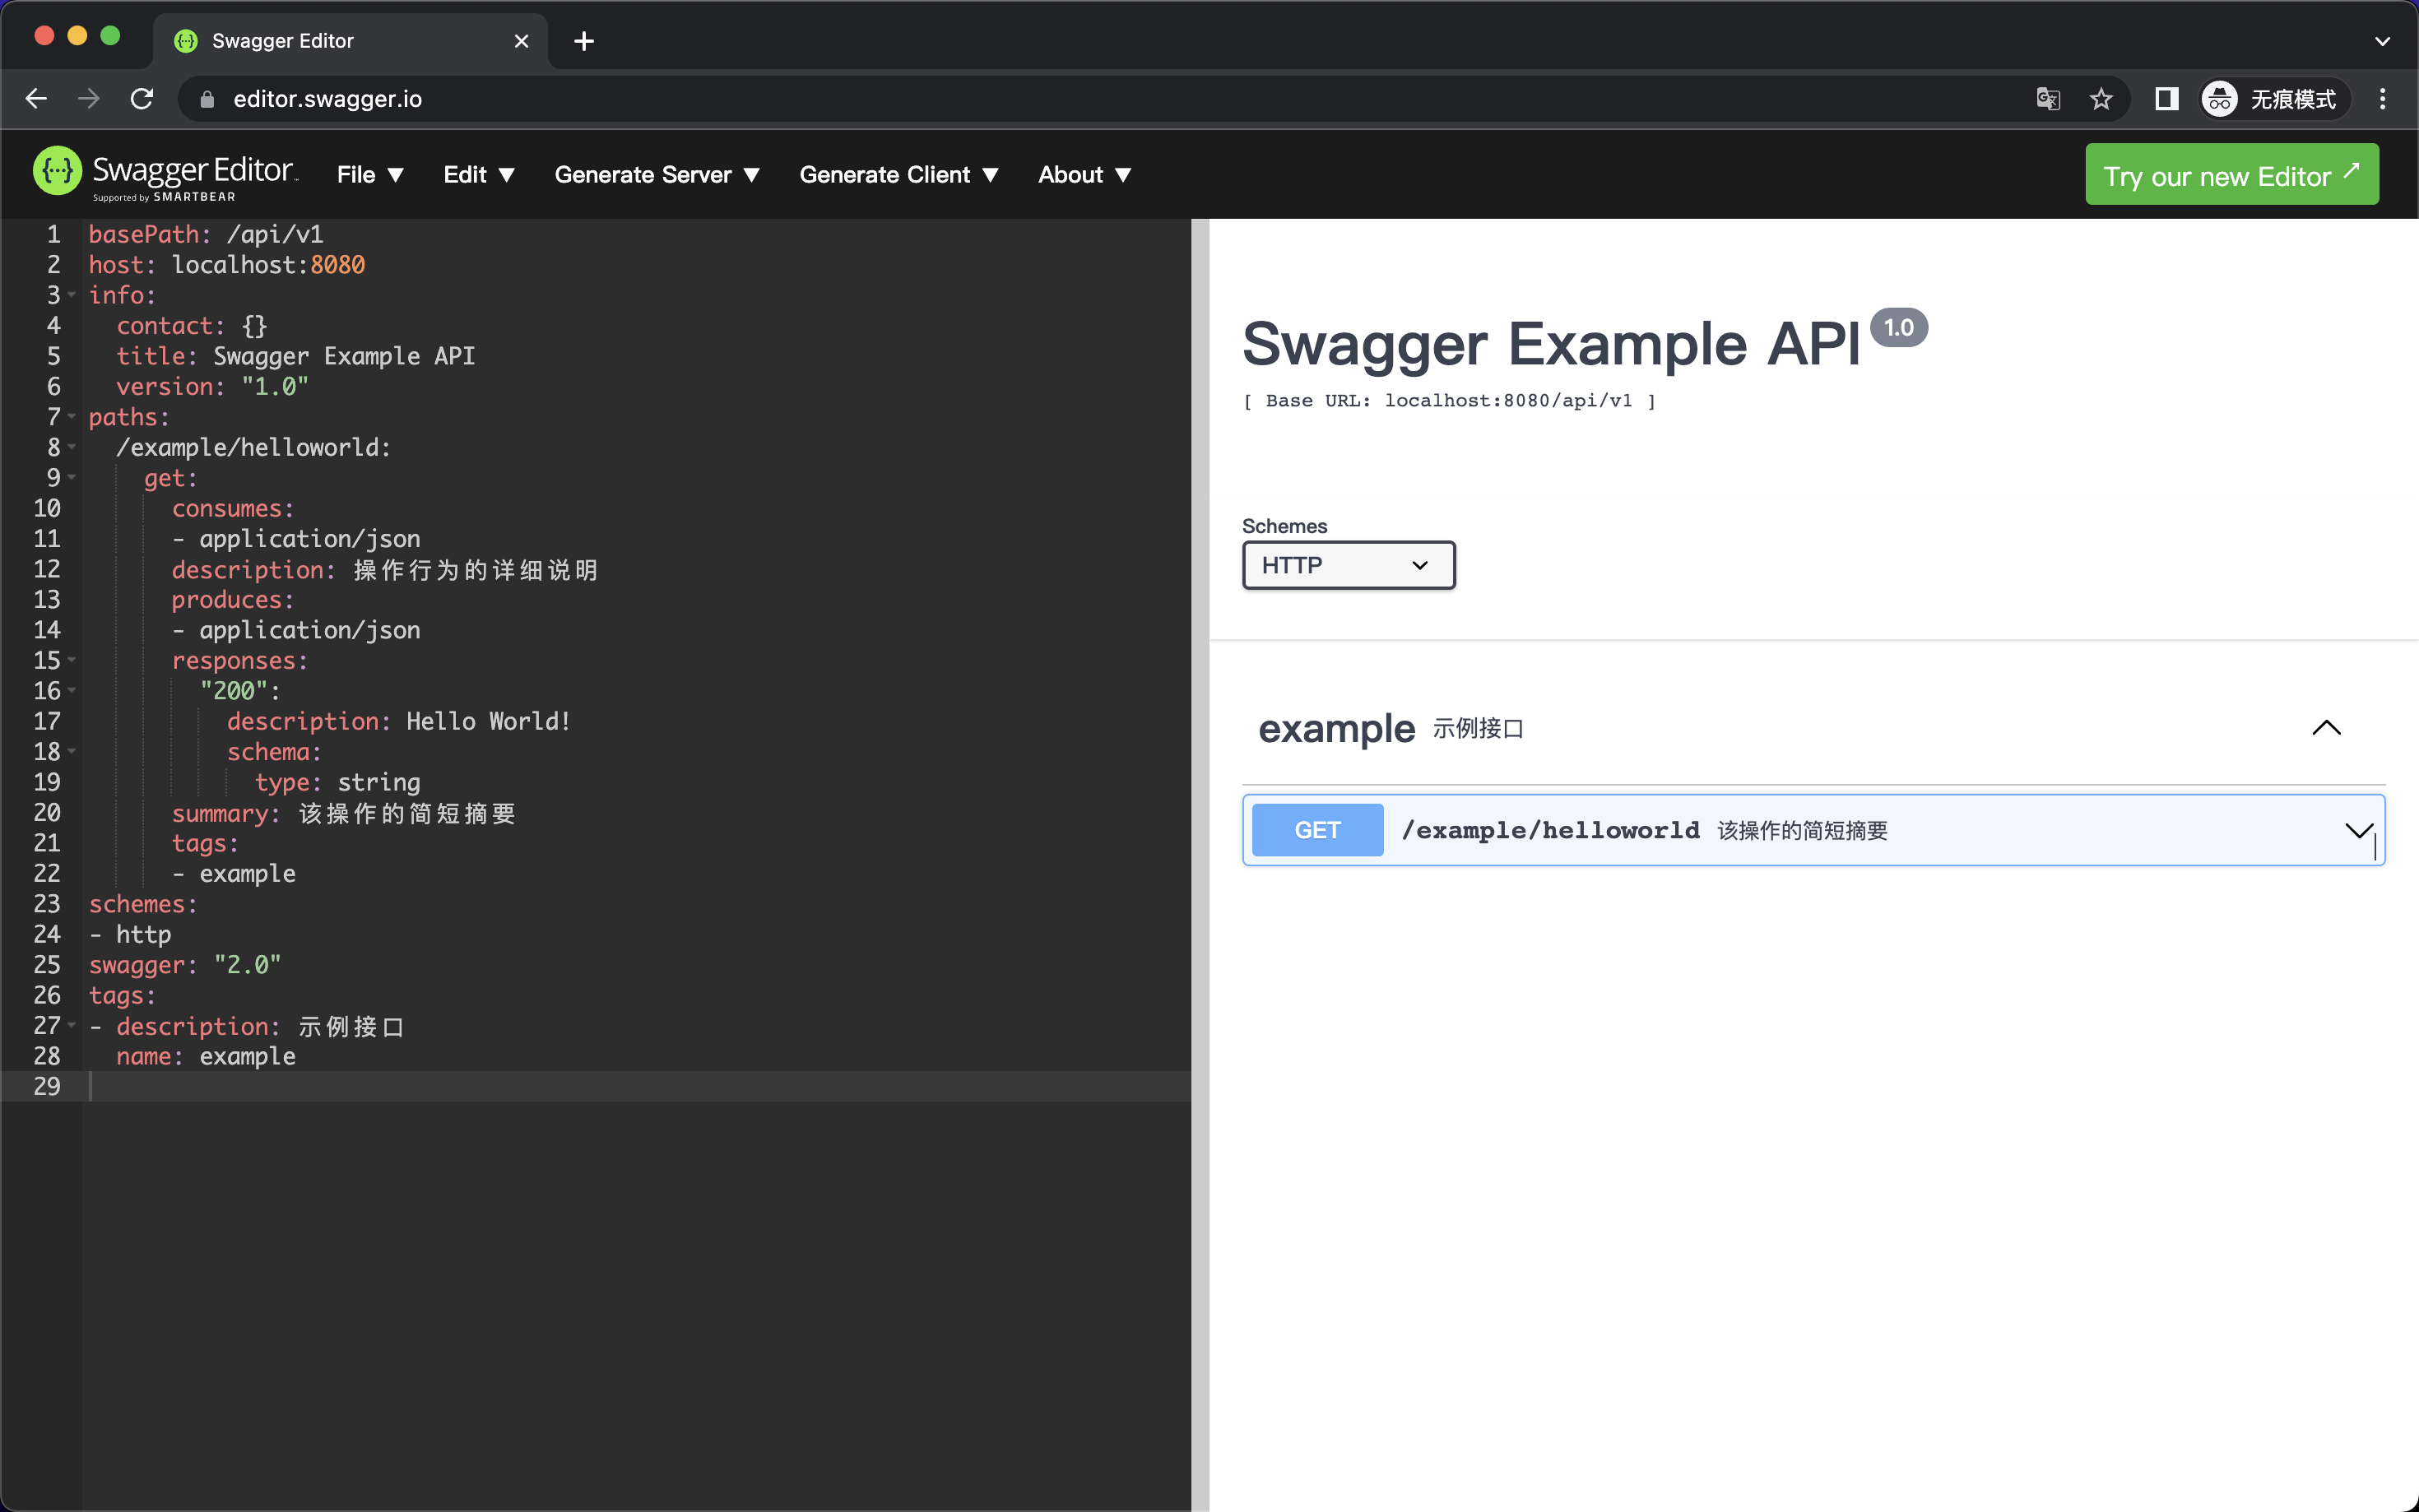 Swagger UI